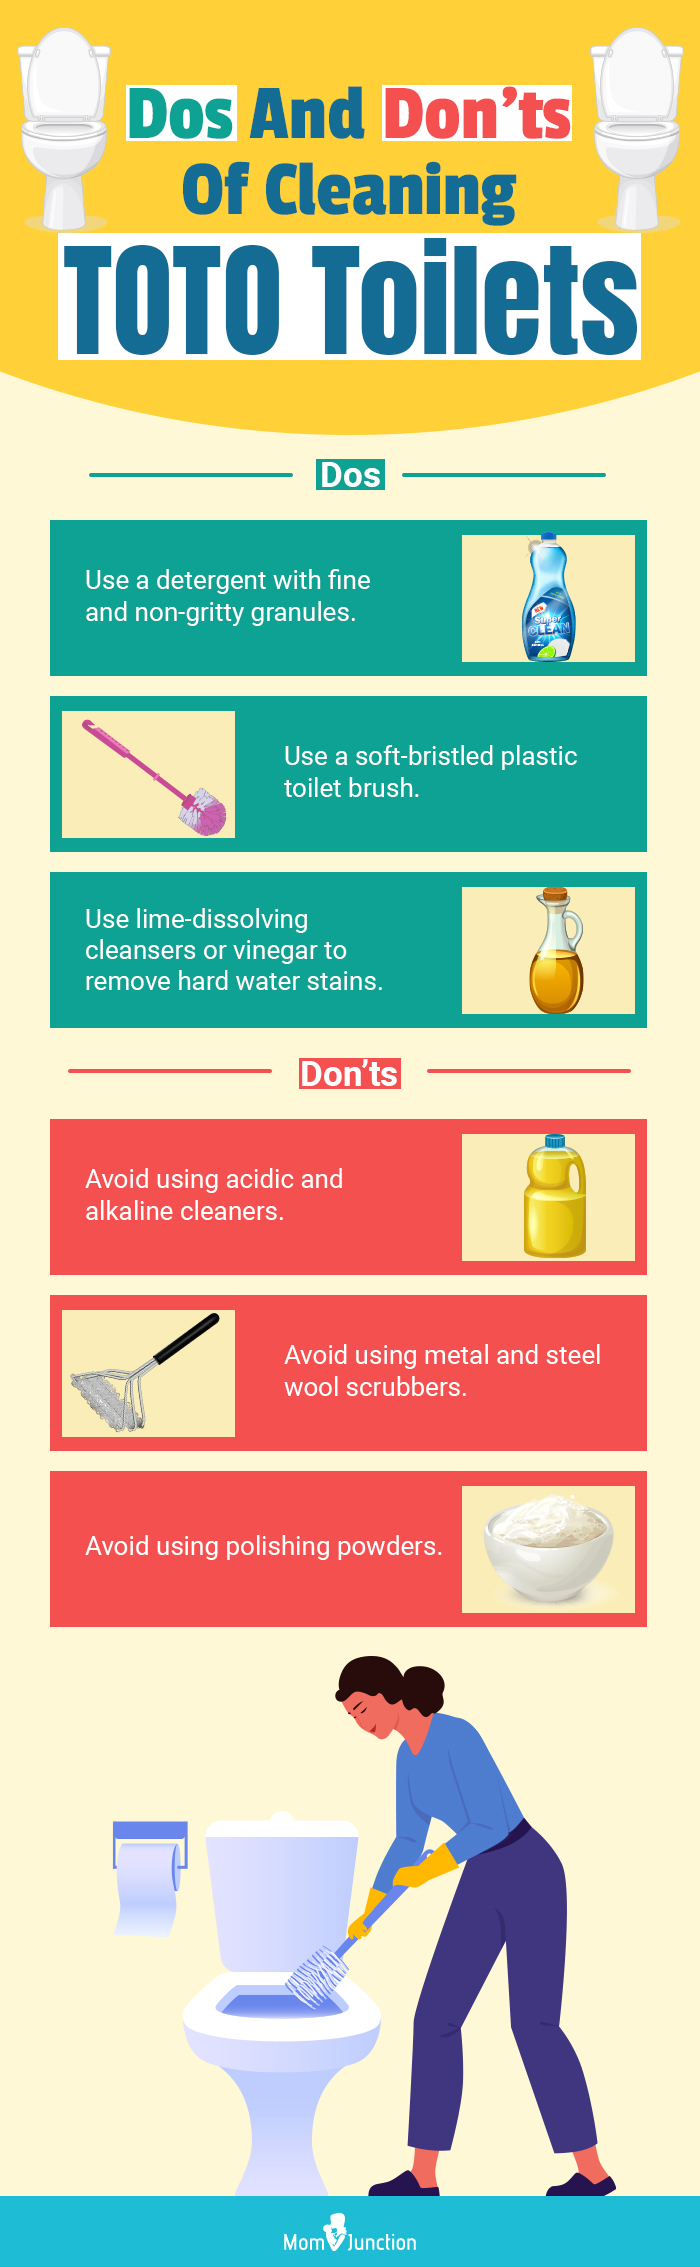 Dos And Don’ts Of Cleaning TOTO Toilets (infographic)